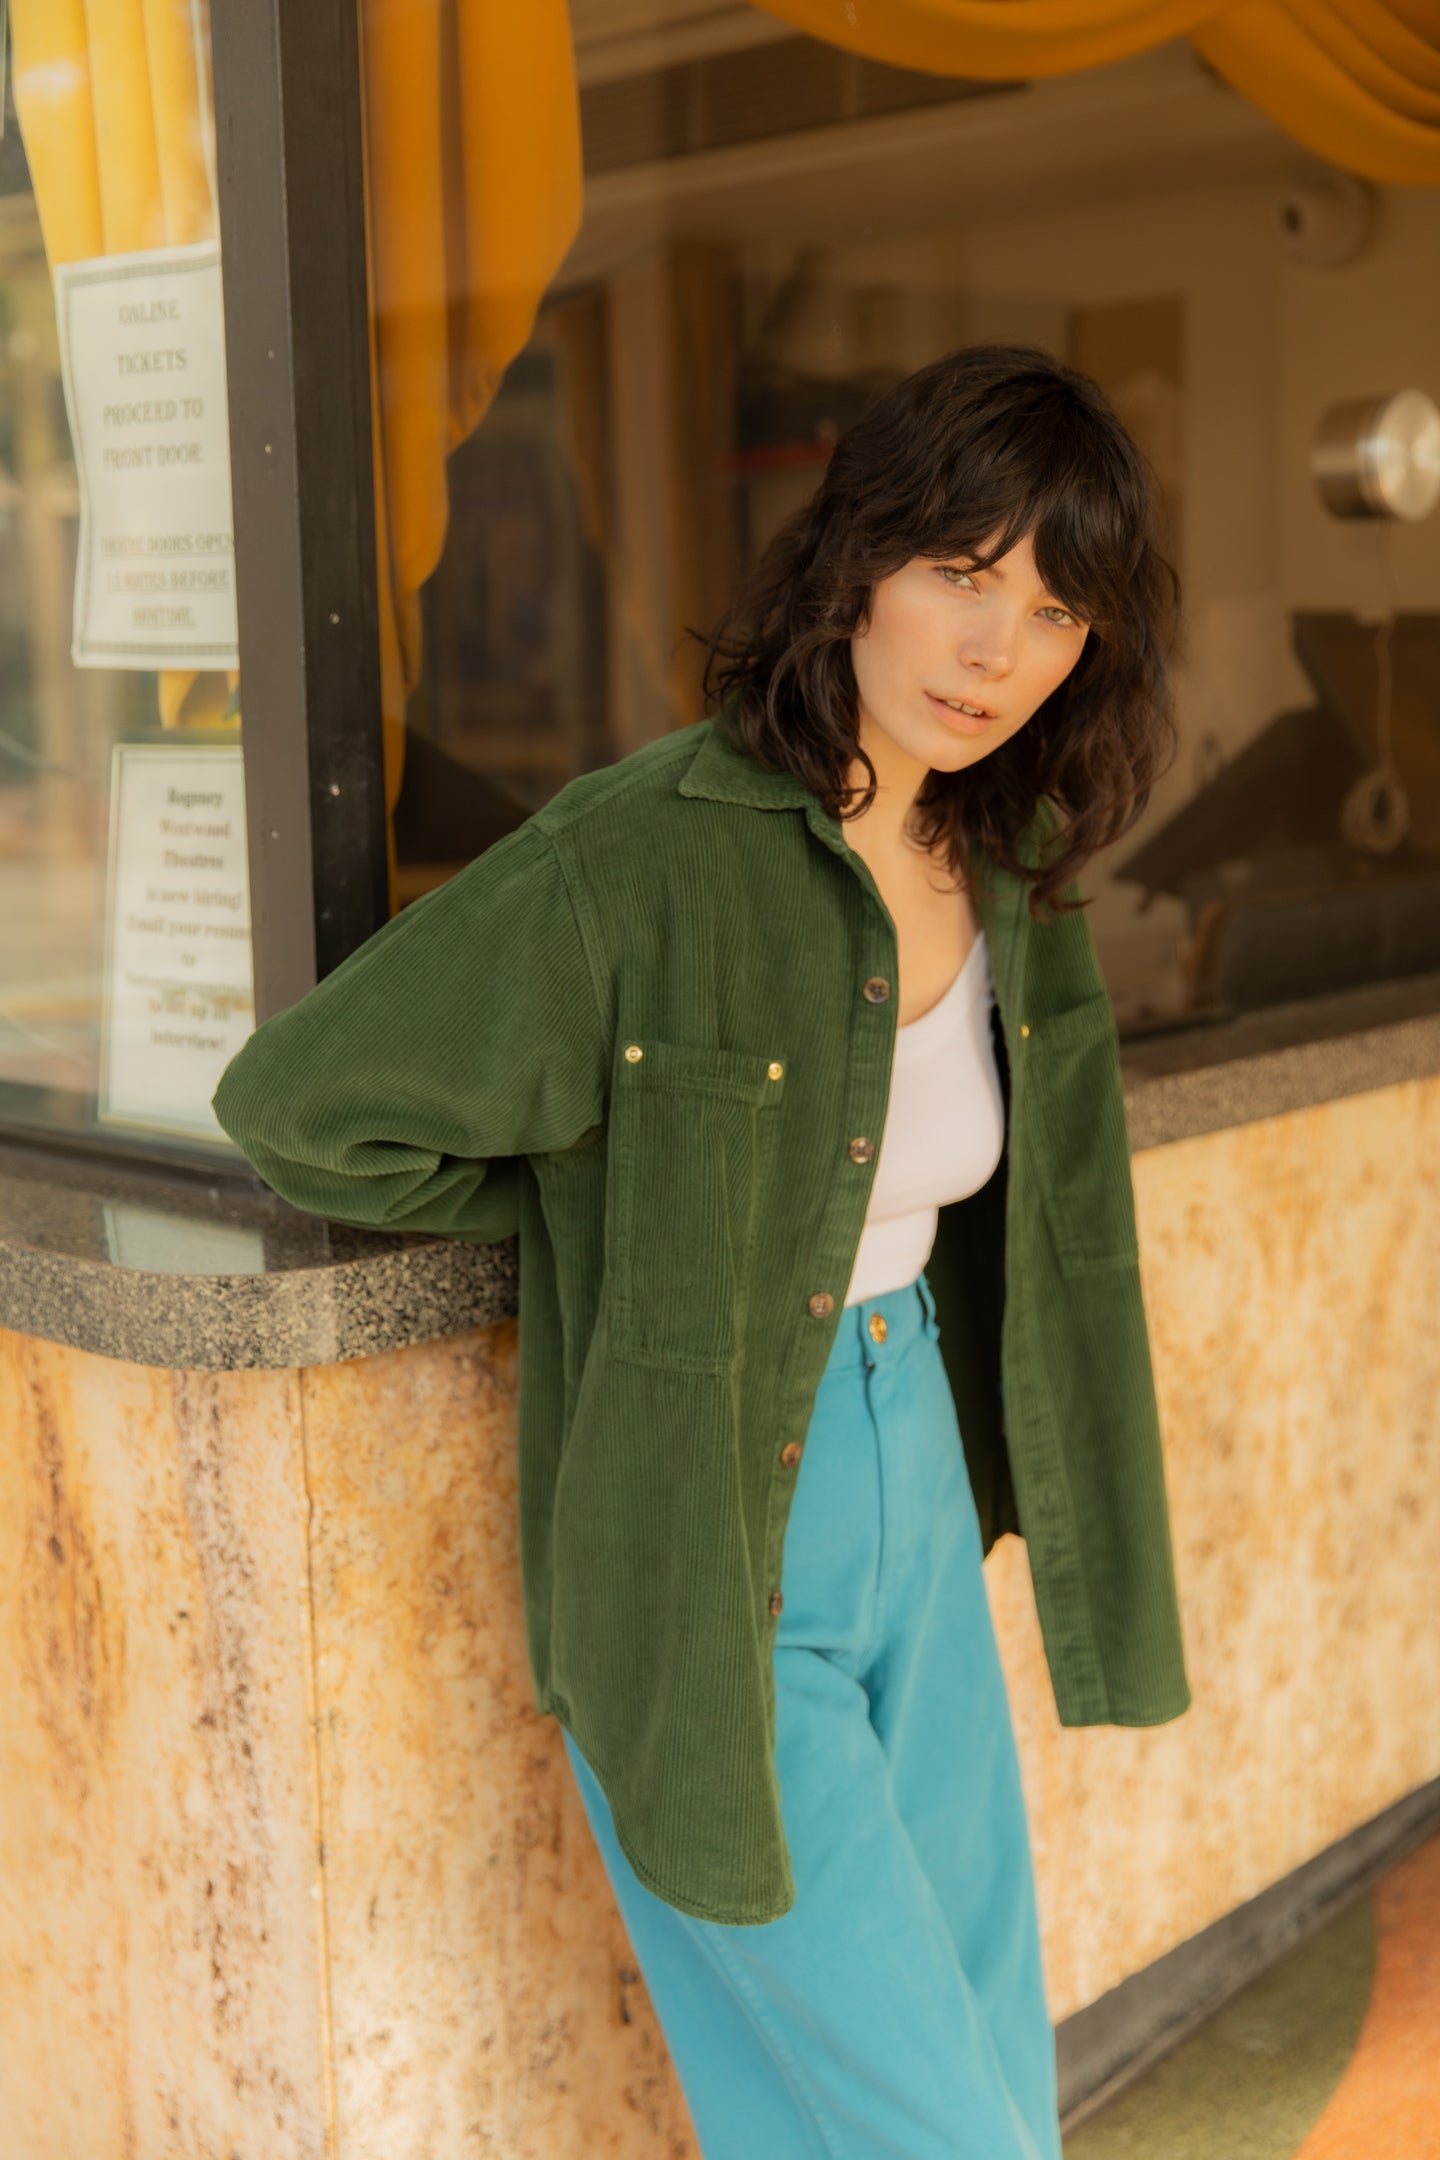 Dani is wearing Corduroy Overshirt in Swamp Green, Cropped Cami in Vintage Off-White and Bell Bottoms in Marine Blue